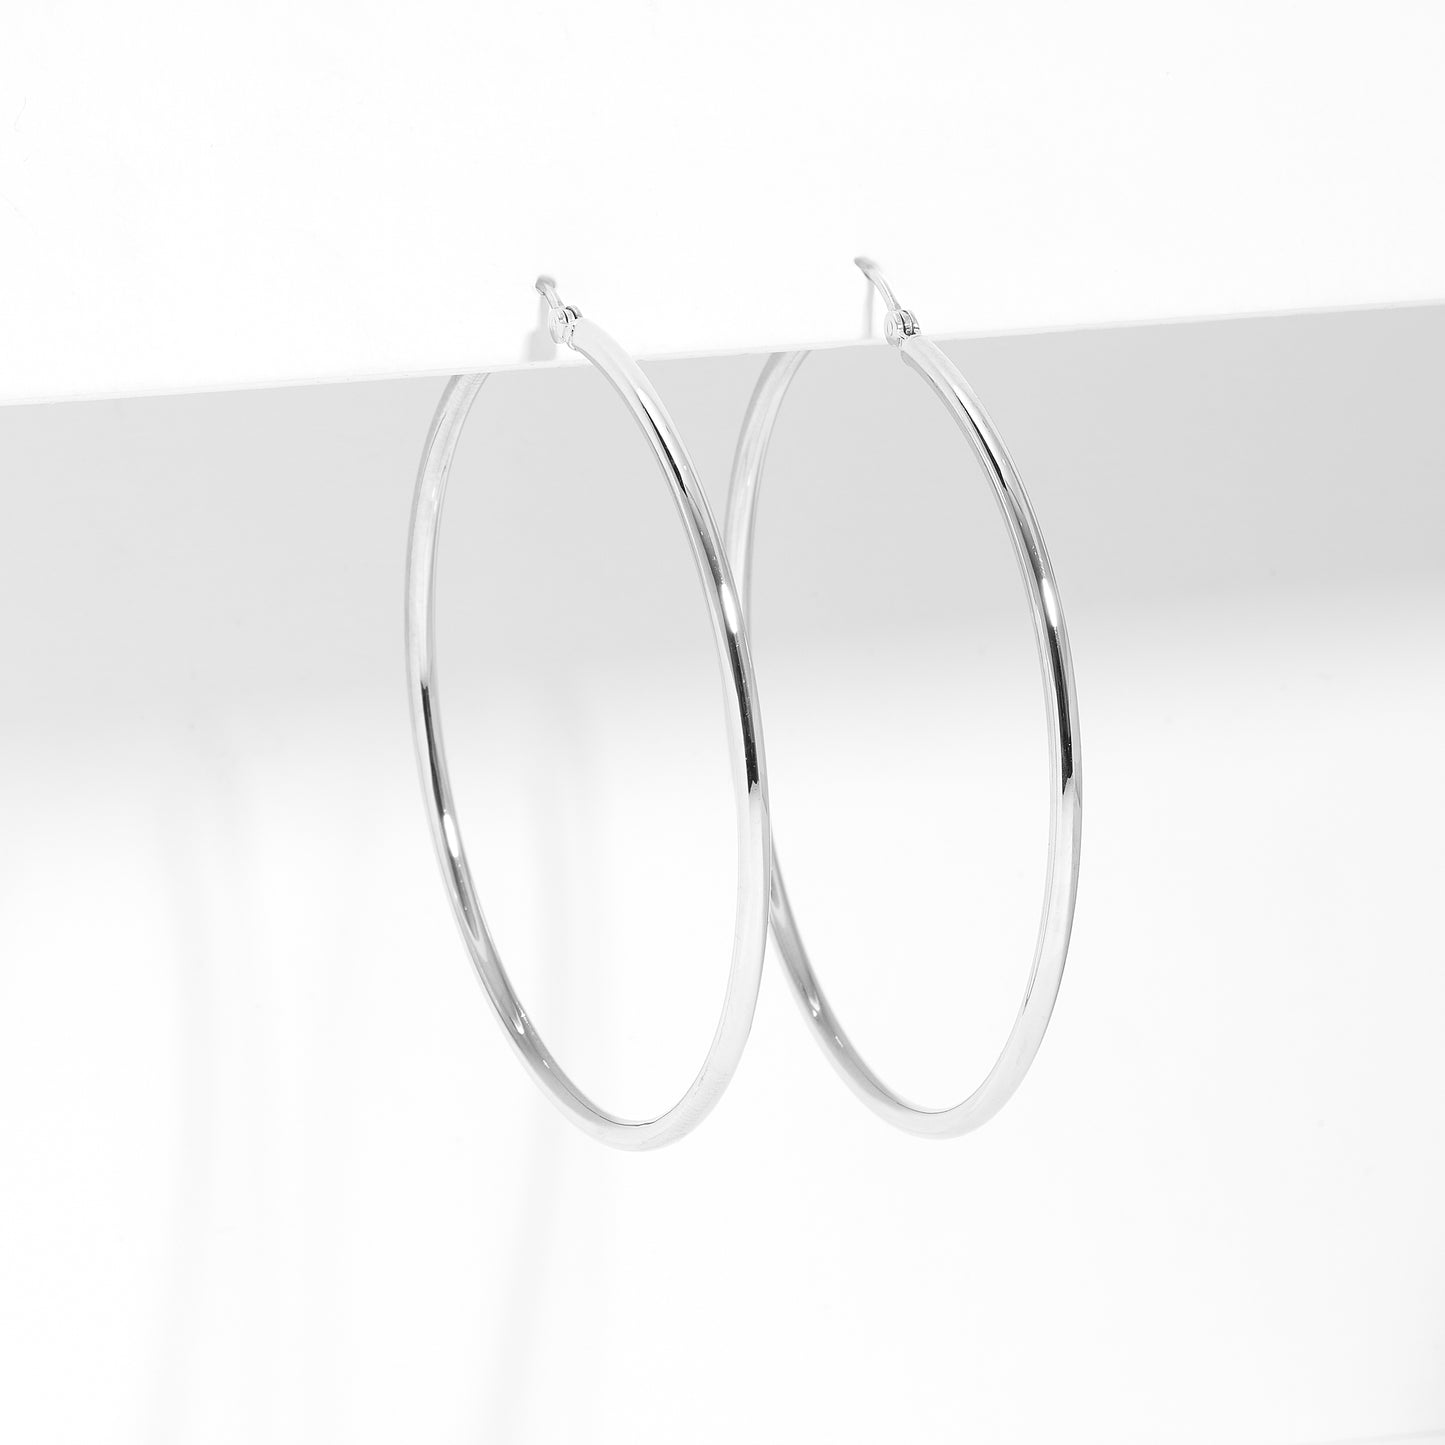 9K White Gold Polished Round Hoop Earrings 45mm